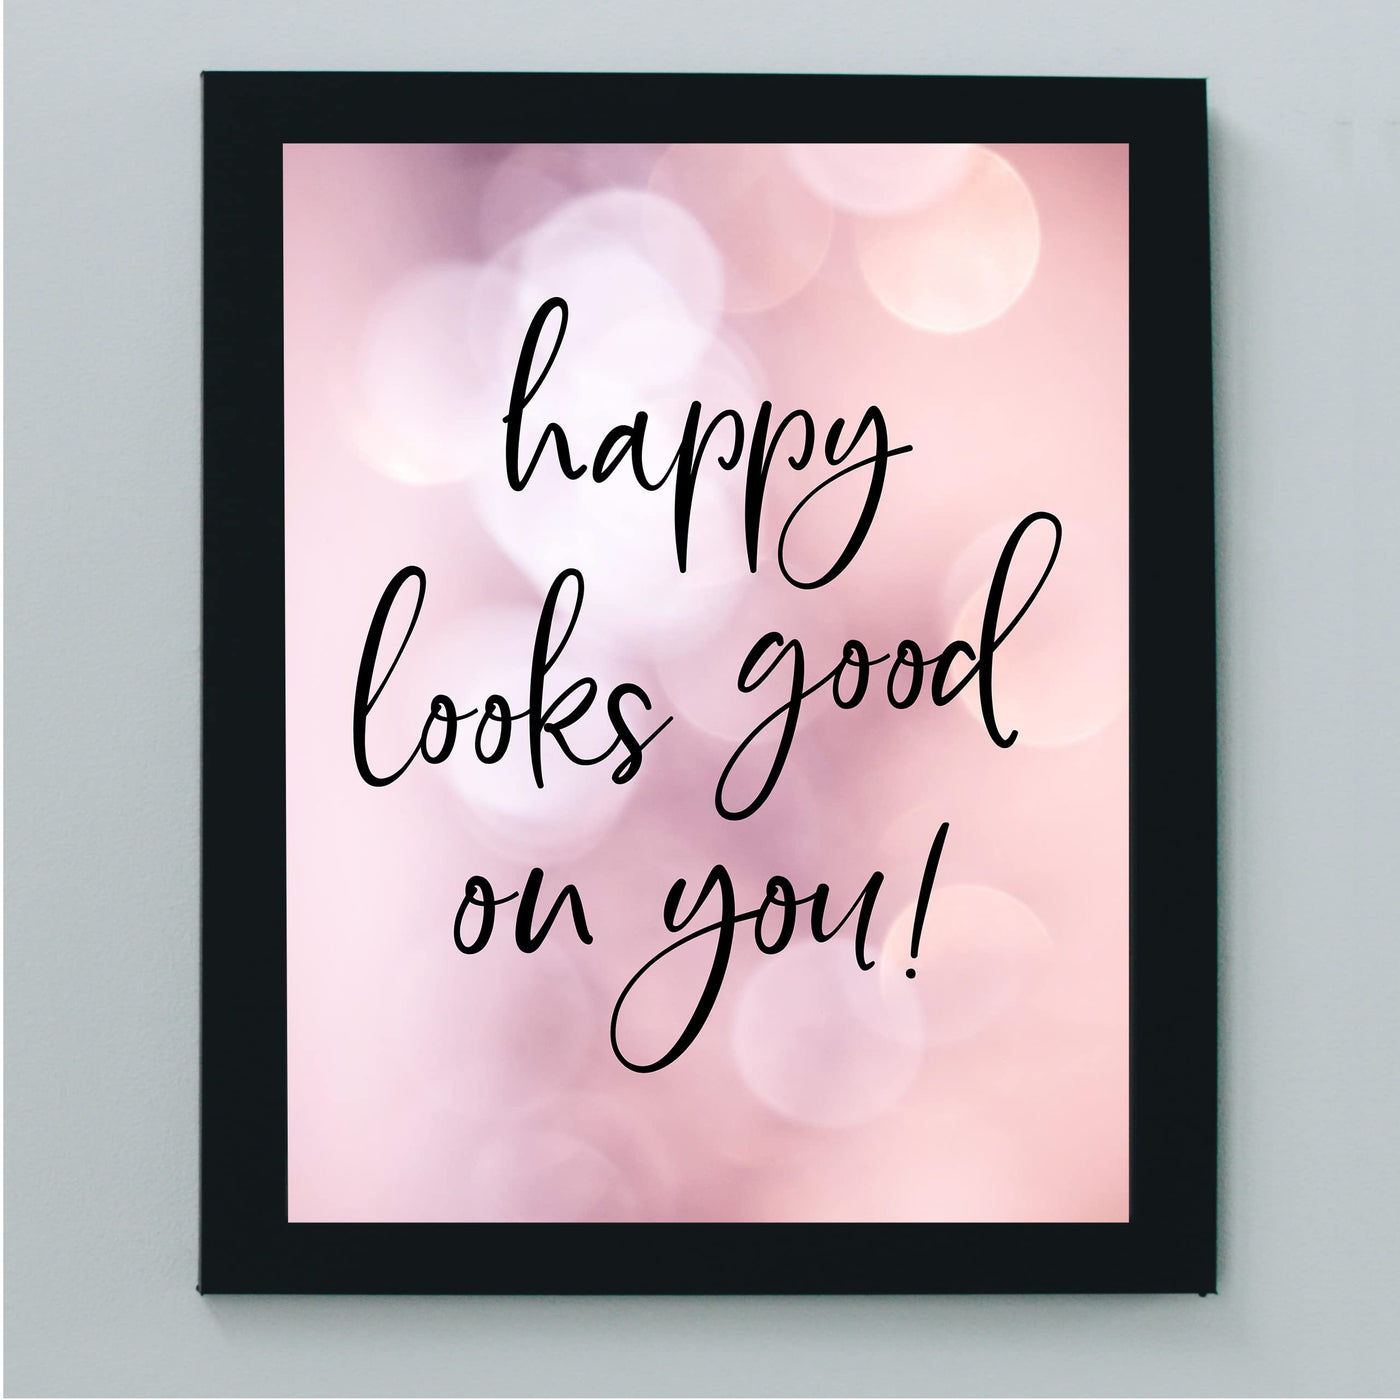 Happy Looks Good On You!- Inspirational Quotes Wall Art -8 x 10" Pink Motivational Wall Print -Ready to Frame. Modern Typographic Decor for Home-Office-School-Store. Positive Gift for Happiness!